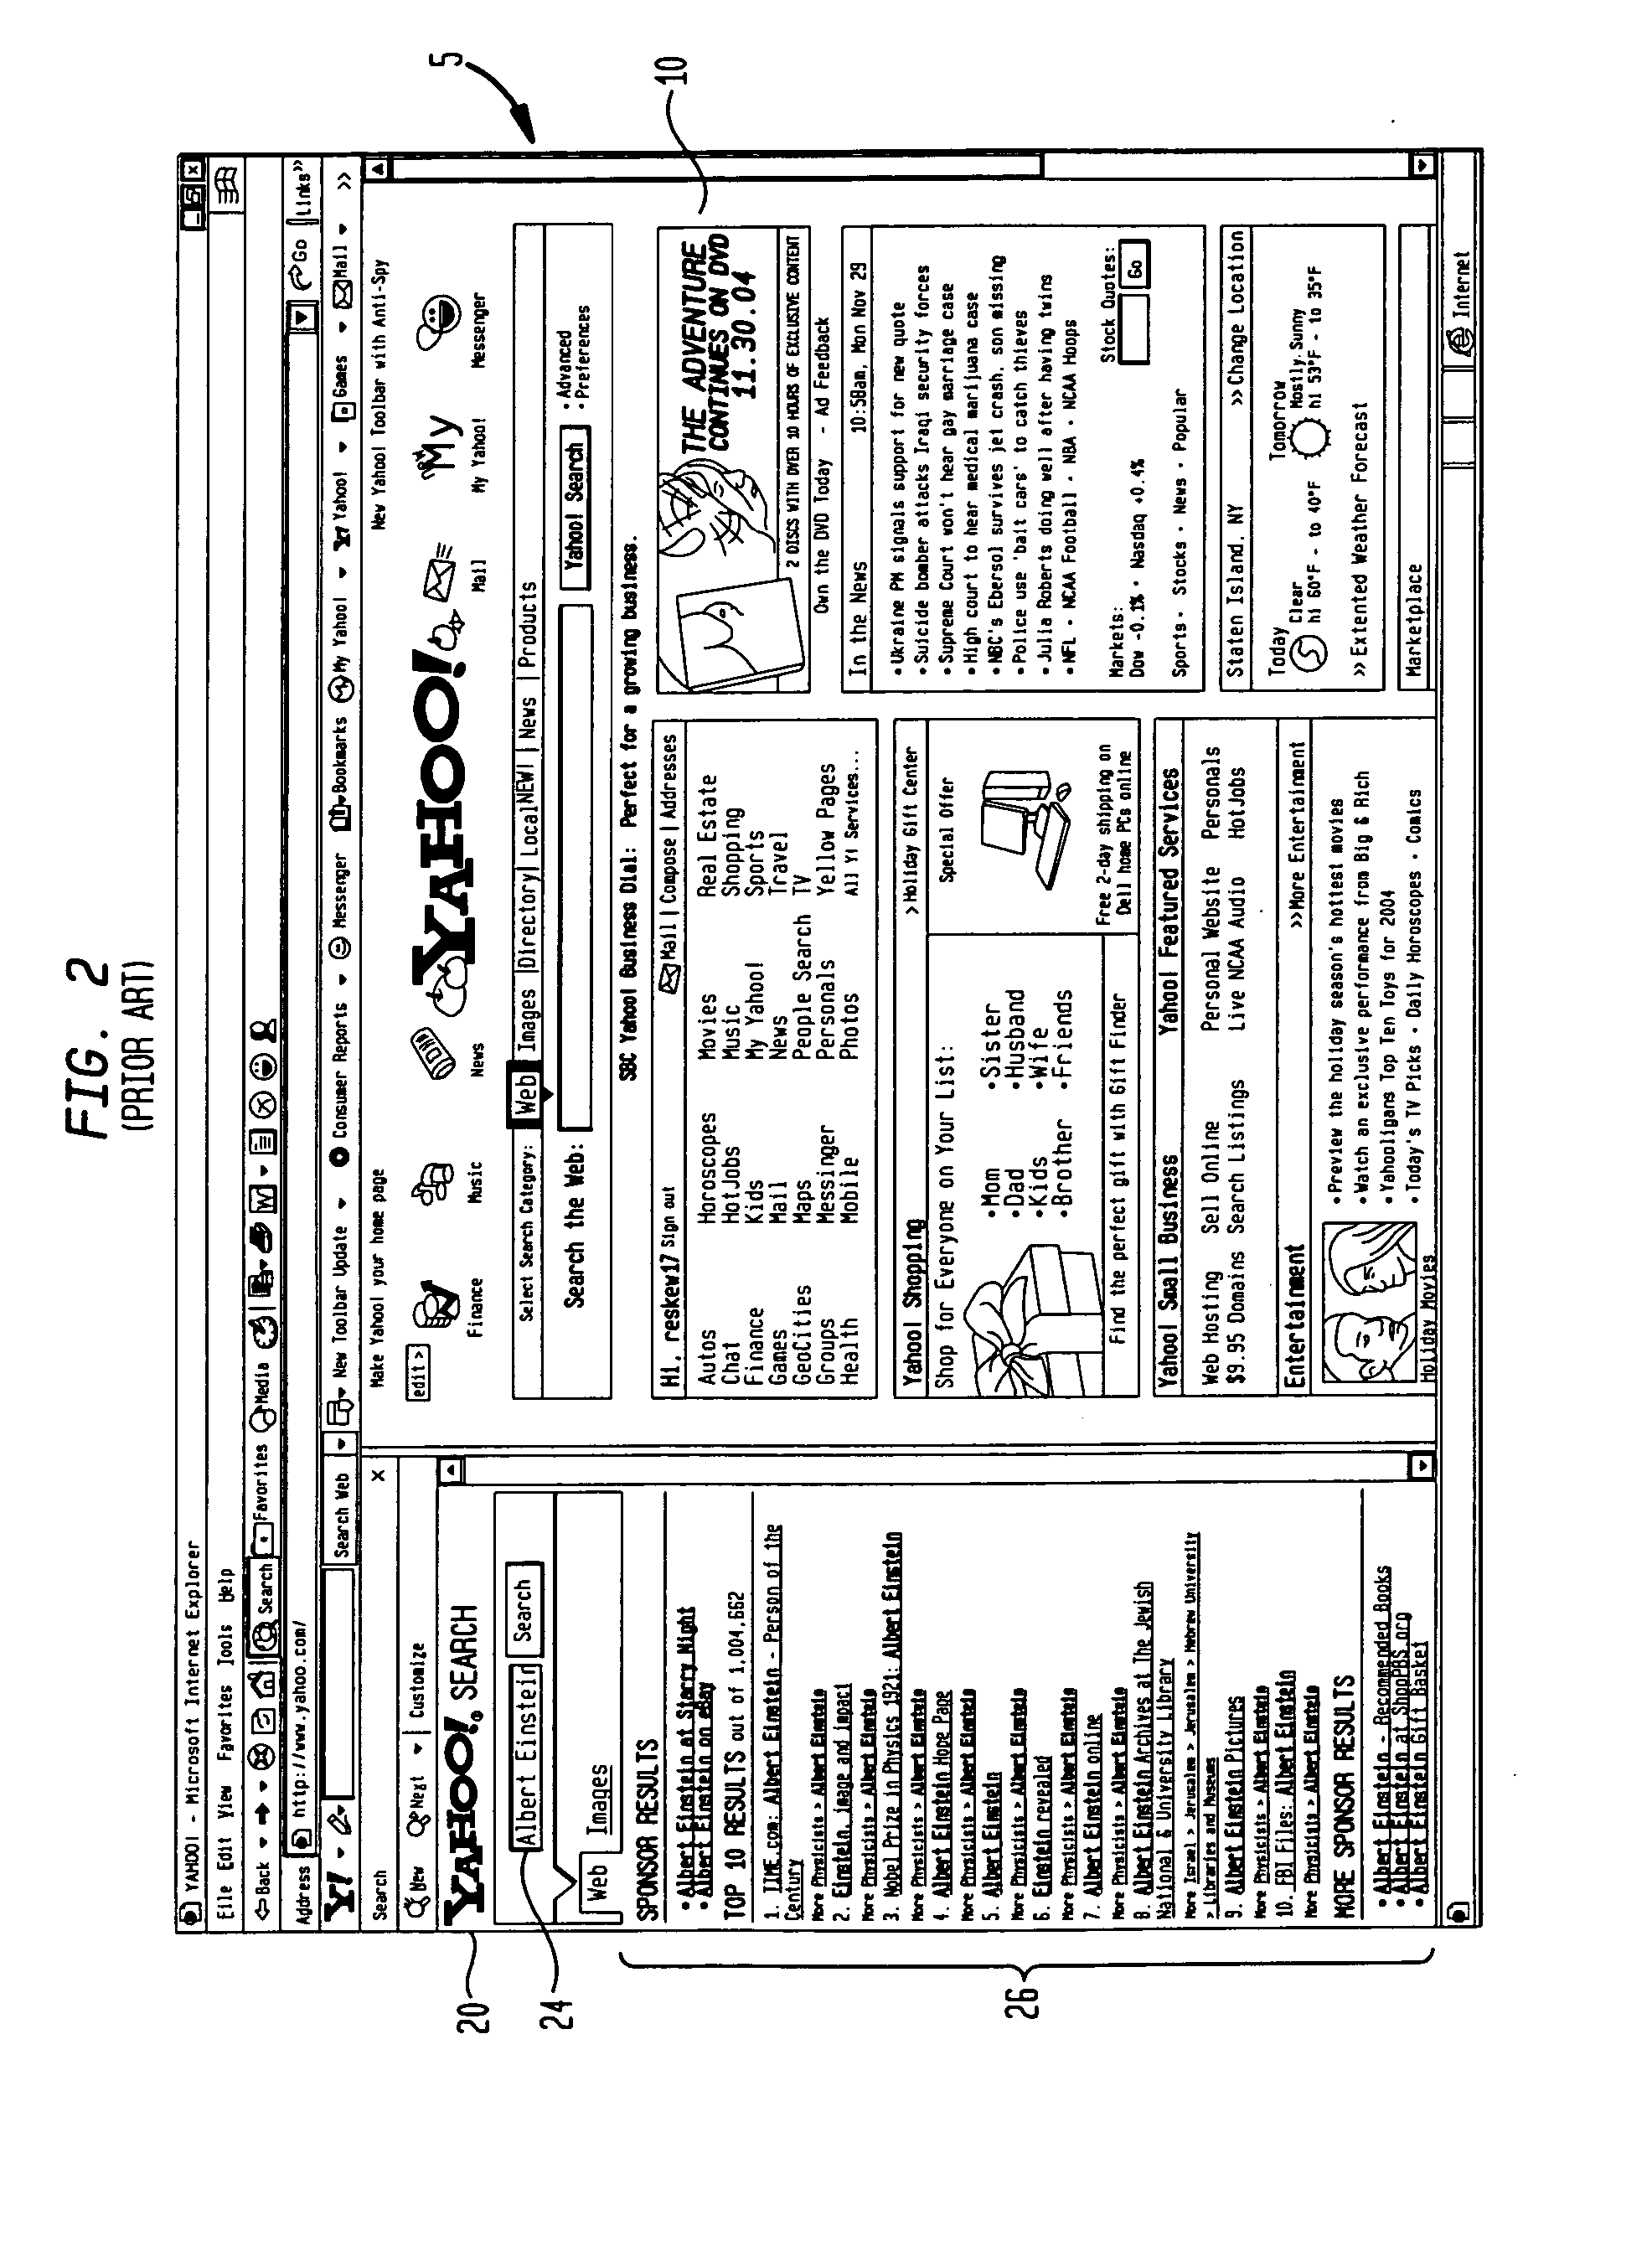 Multiple window browser interface and system and method of generating multiple window browser interface